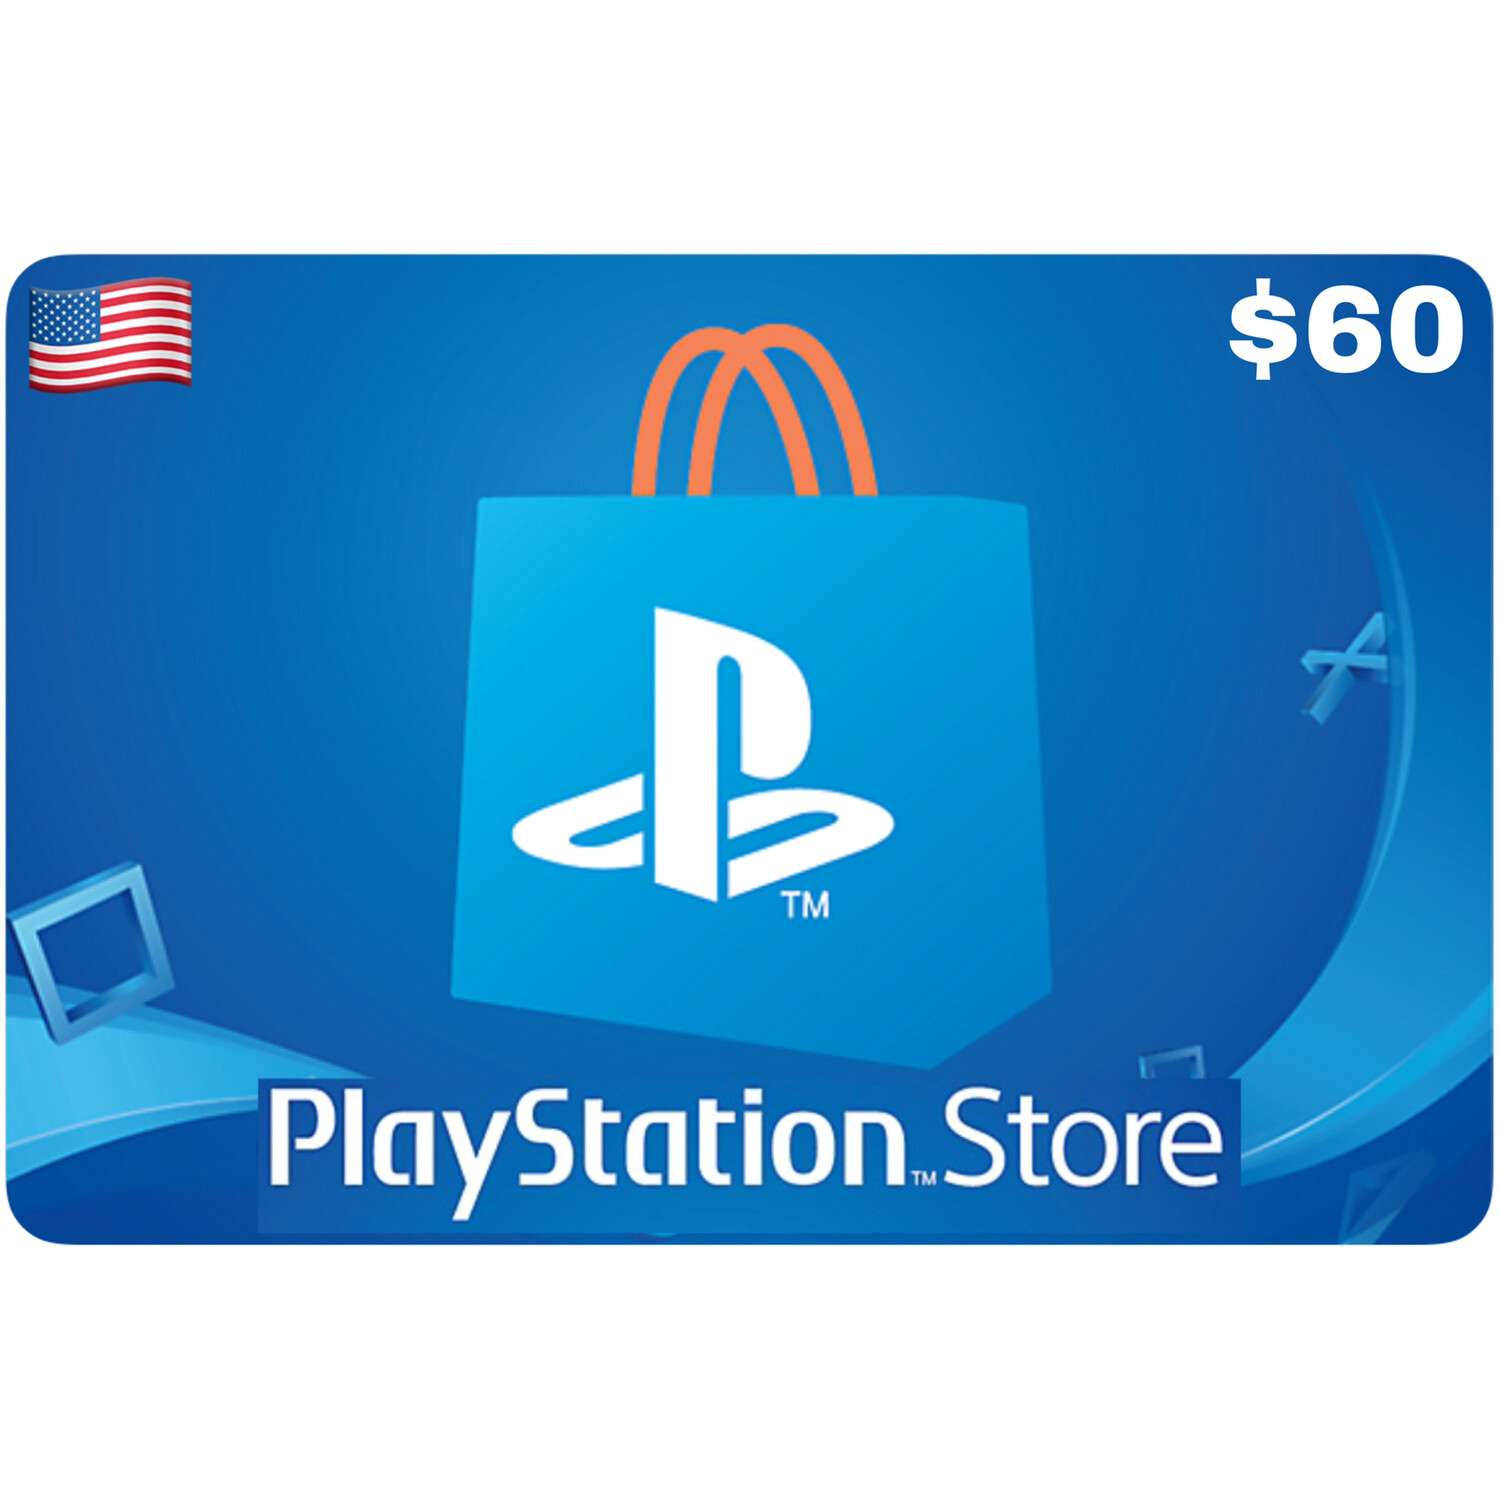 Playstation Store Gift Card US $60